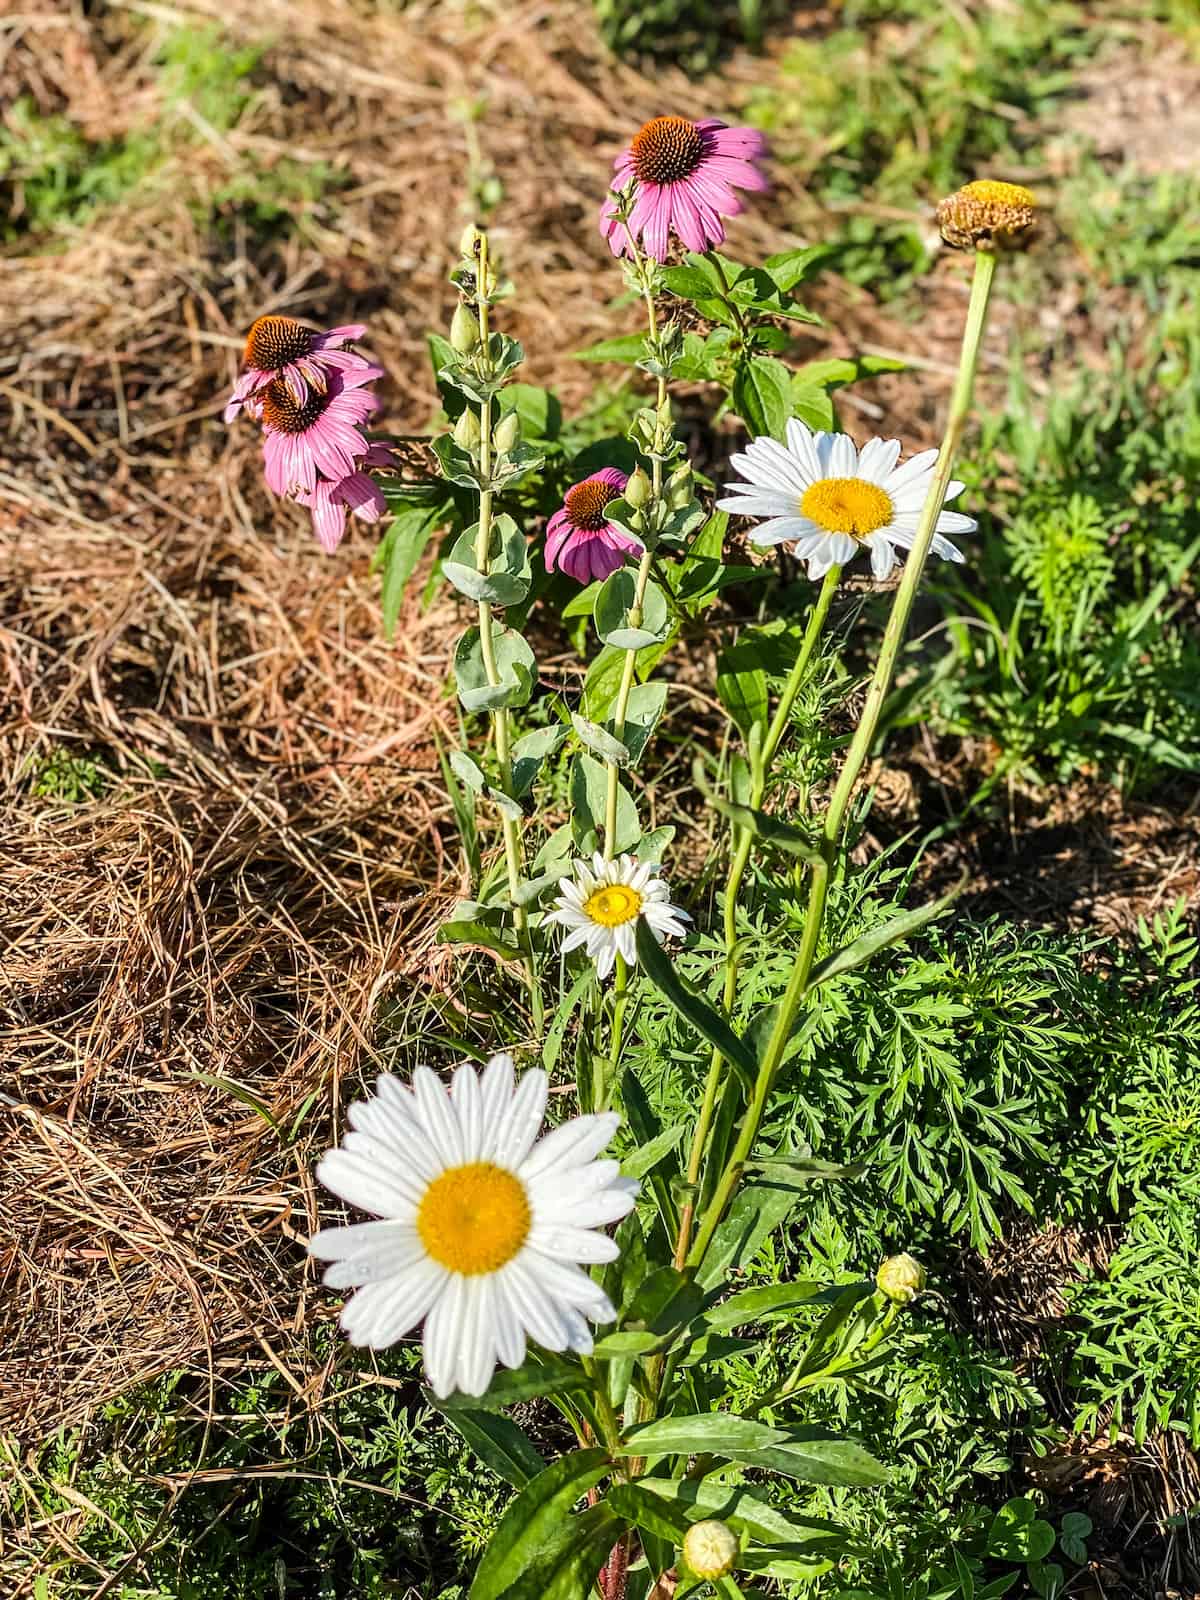 daisies and coneflower growing together.